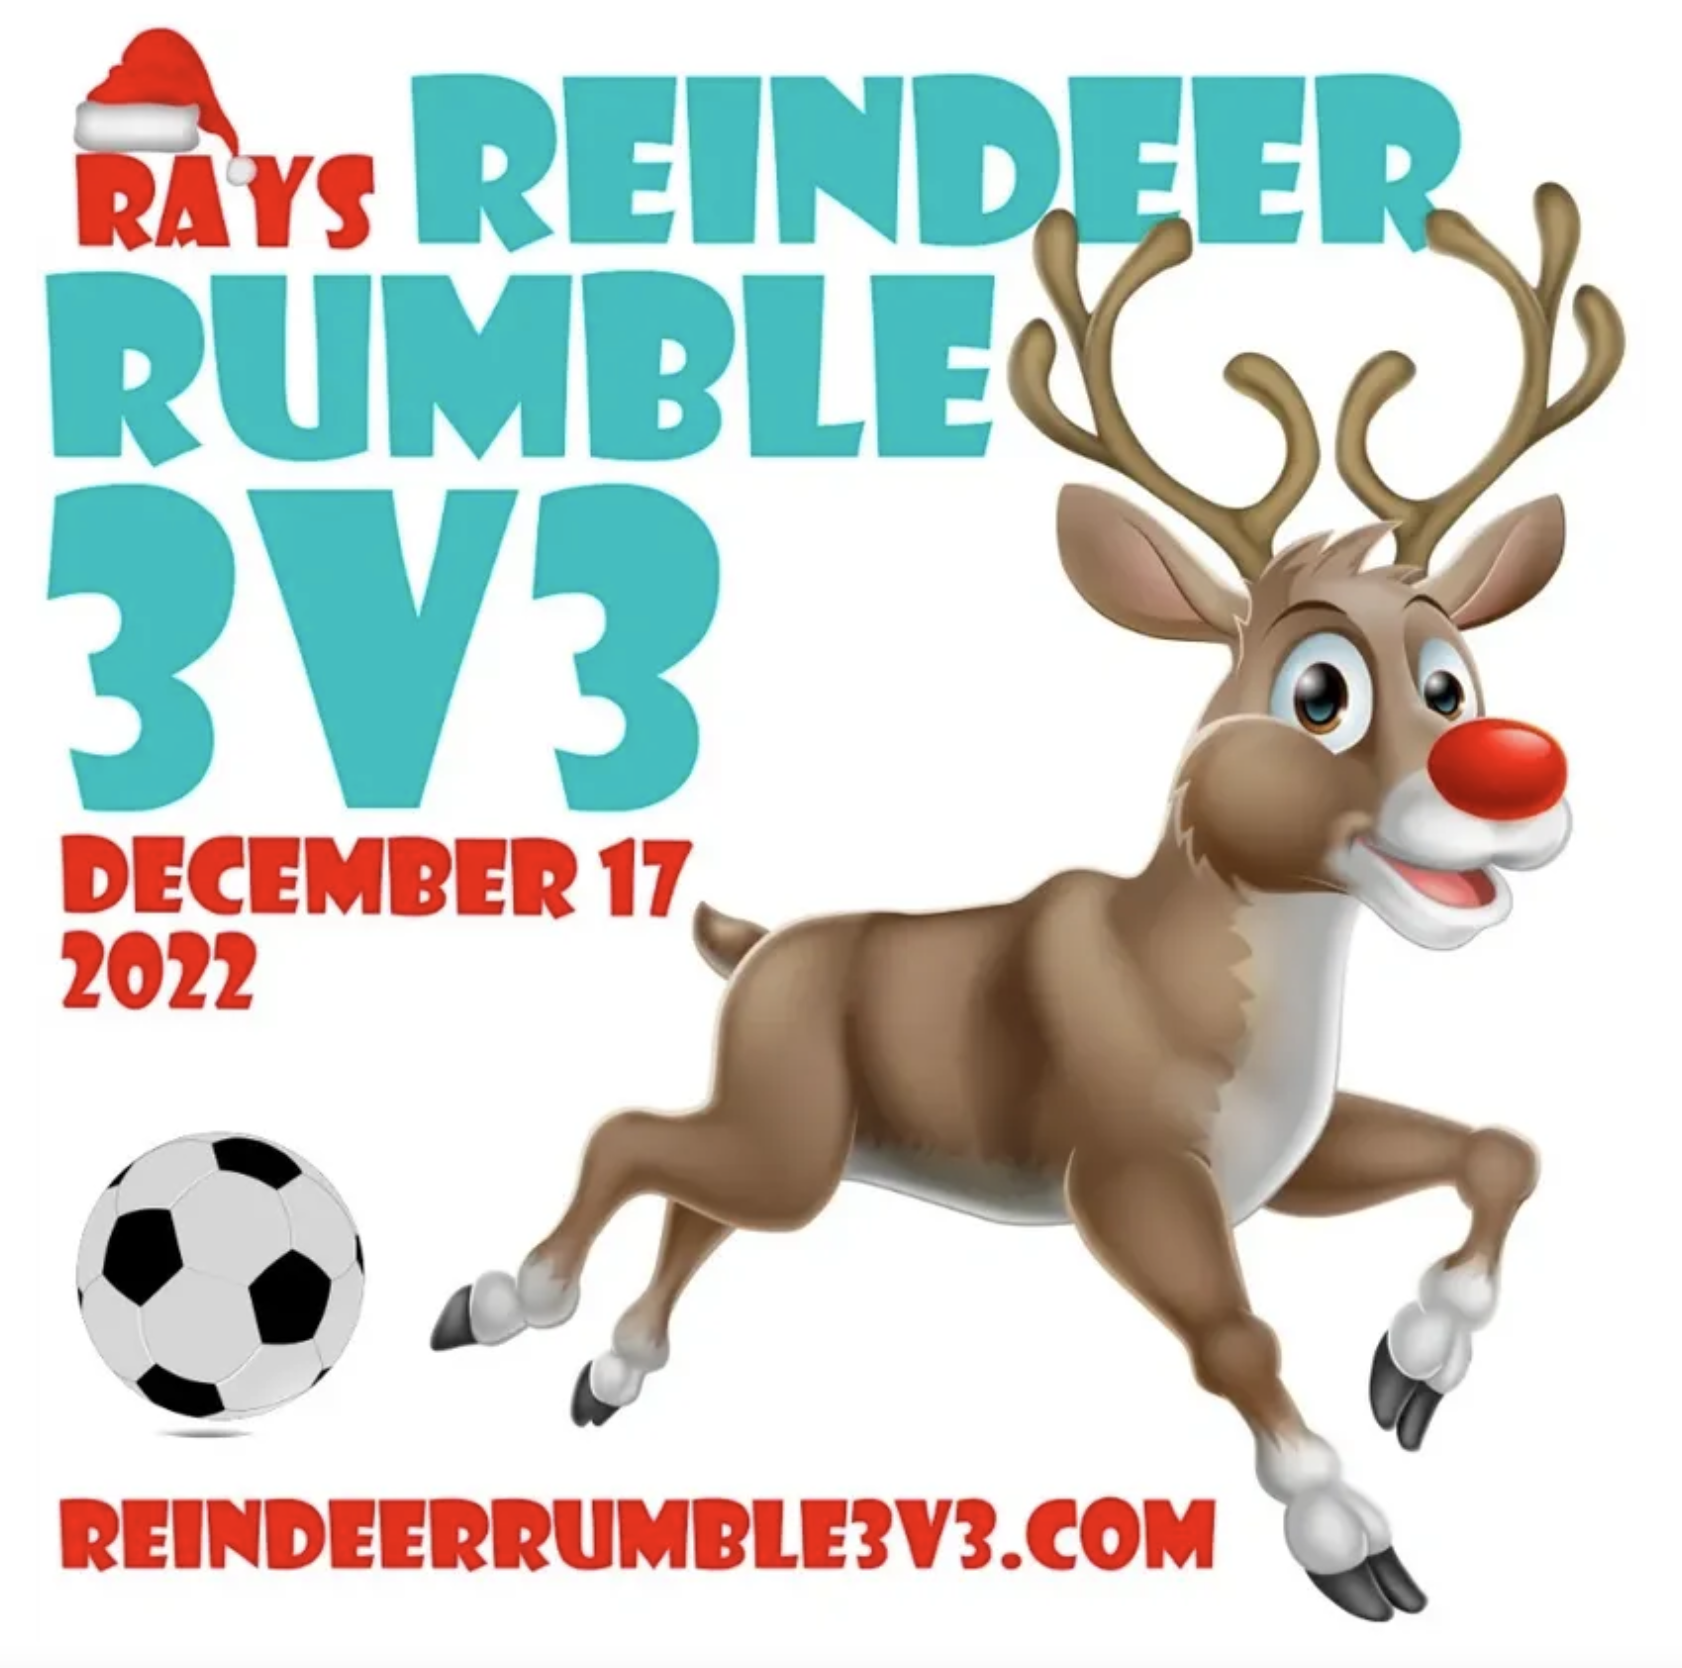 RAY’S REINDEER RUMBLE 3v3 Soccer Tournament